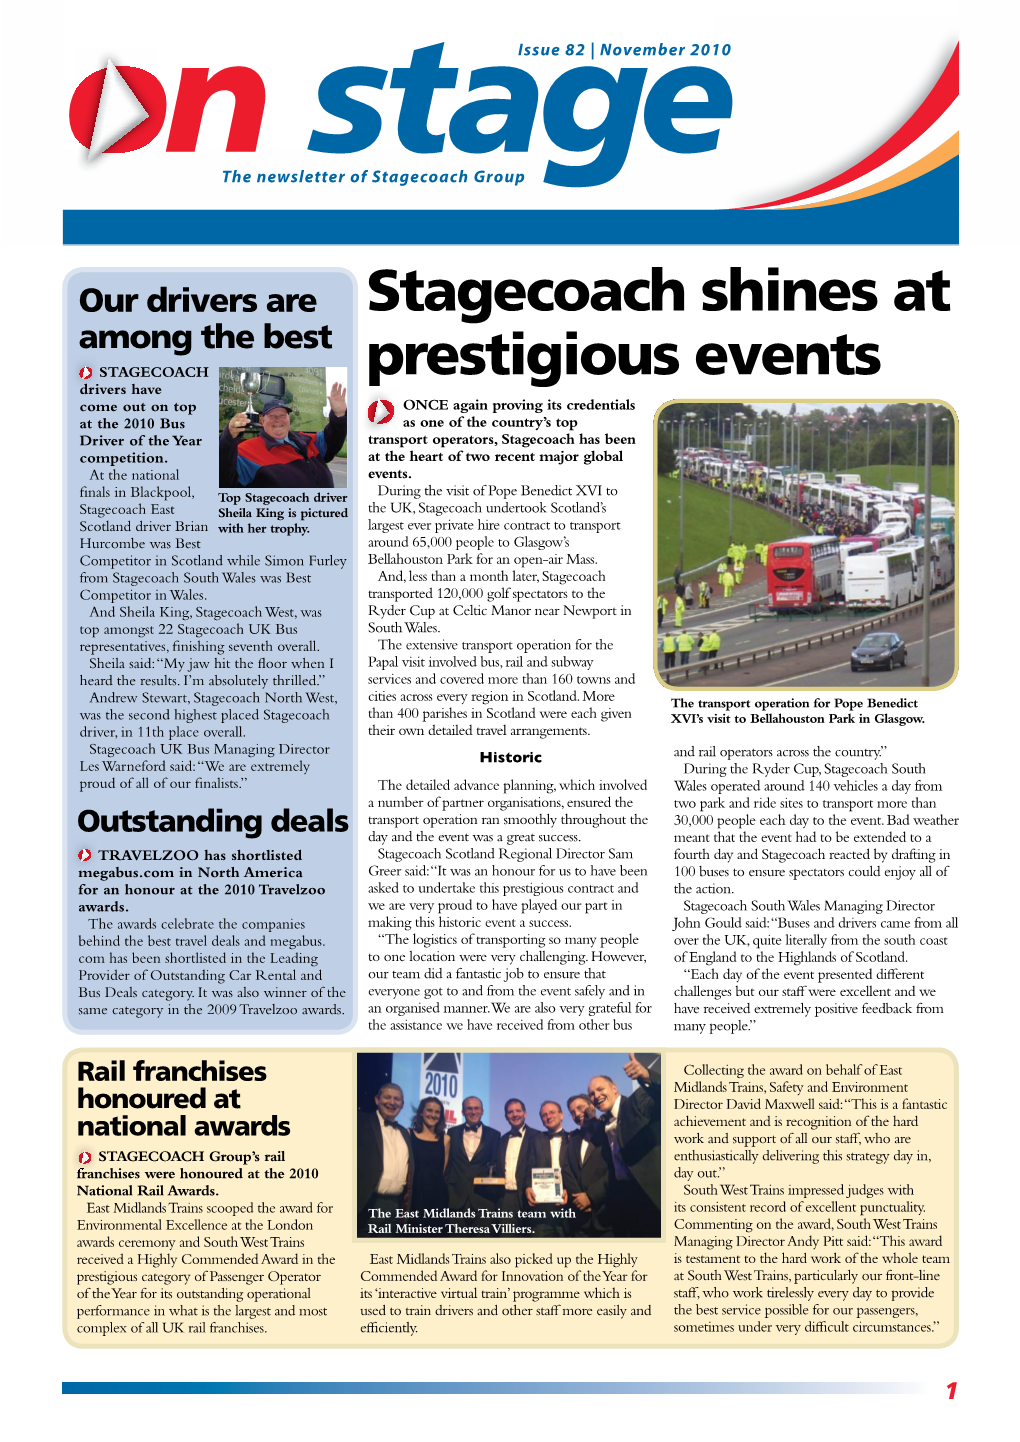 Stagecoach Shines at Prestigious Events